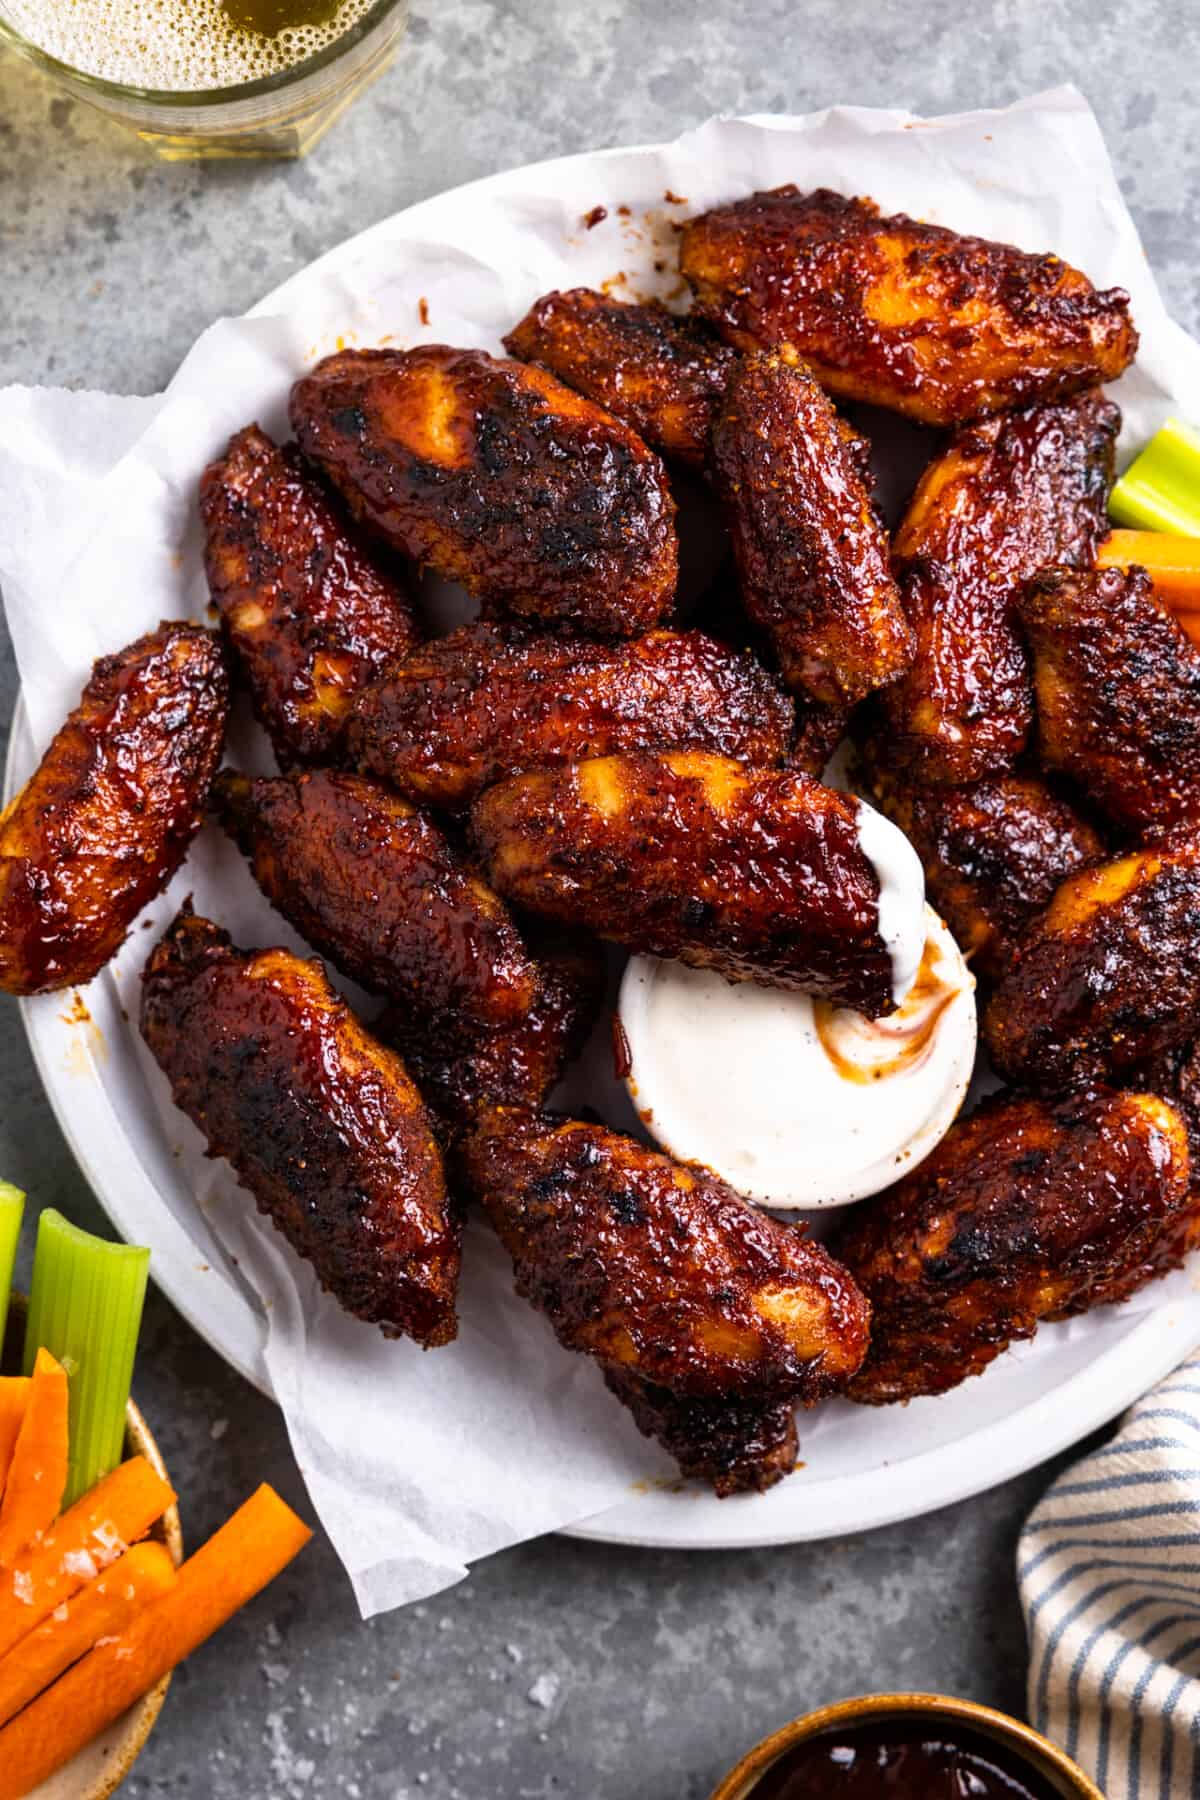 A plate of smoked chicken wings served with a small bowl of ranch, one wing dipped into the ranch.